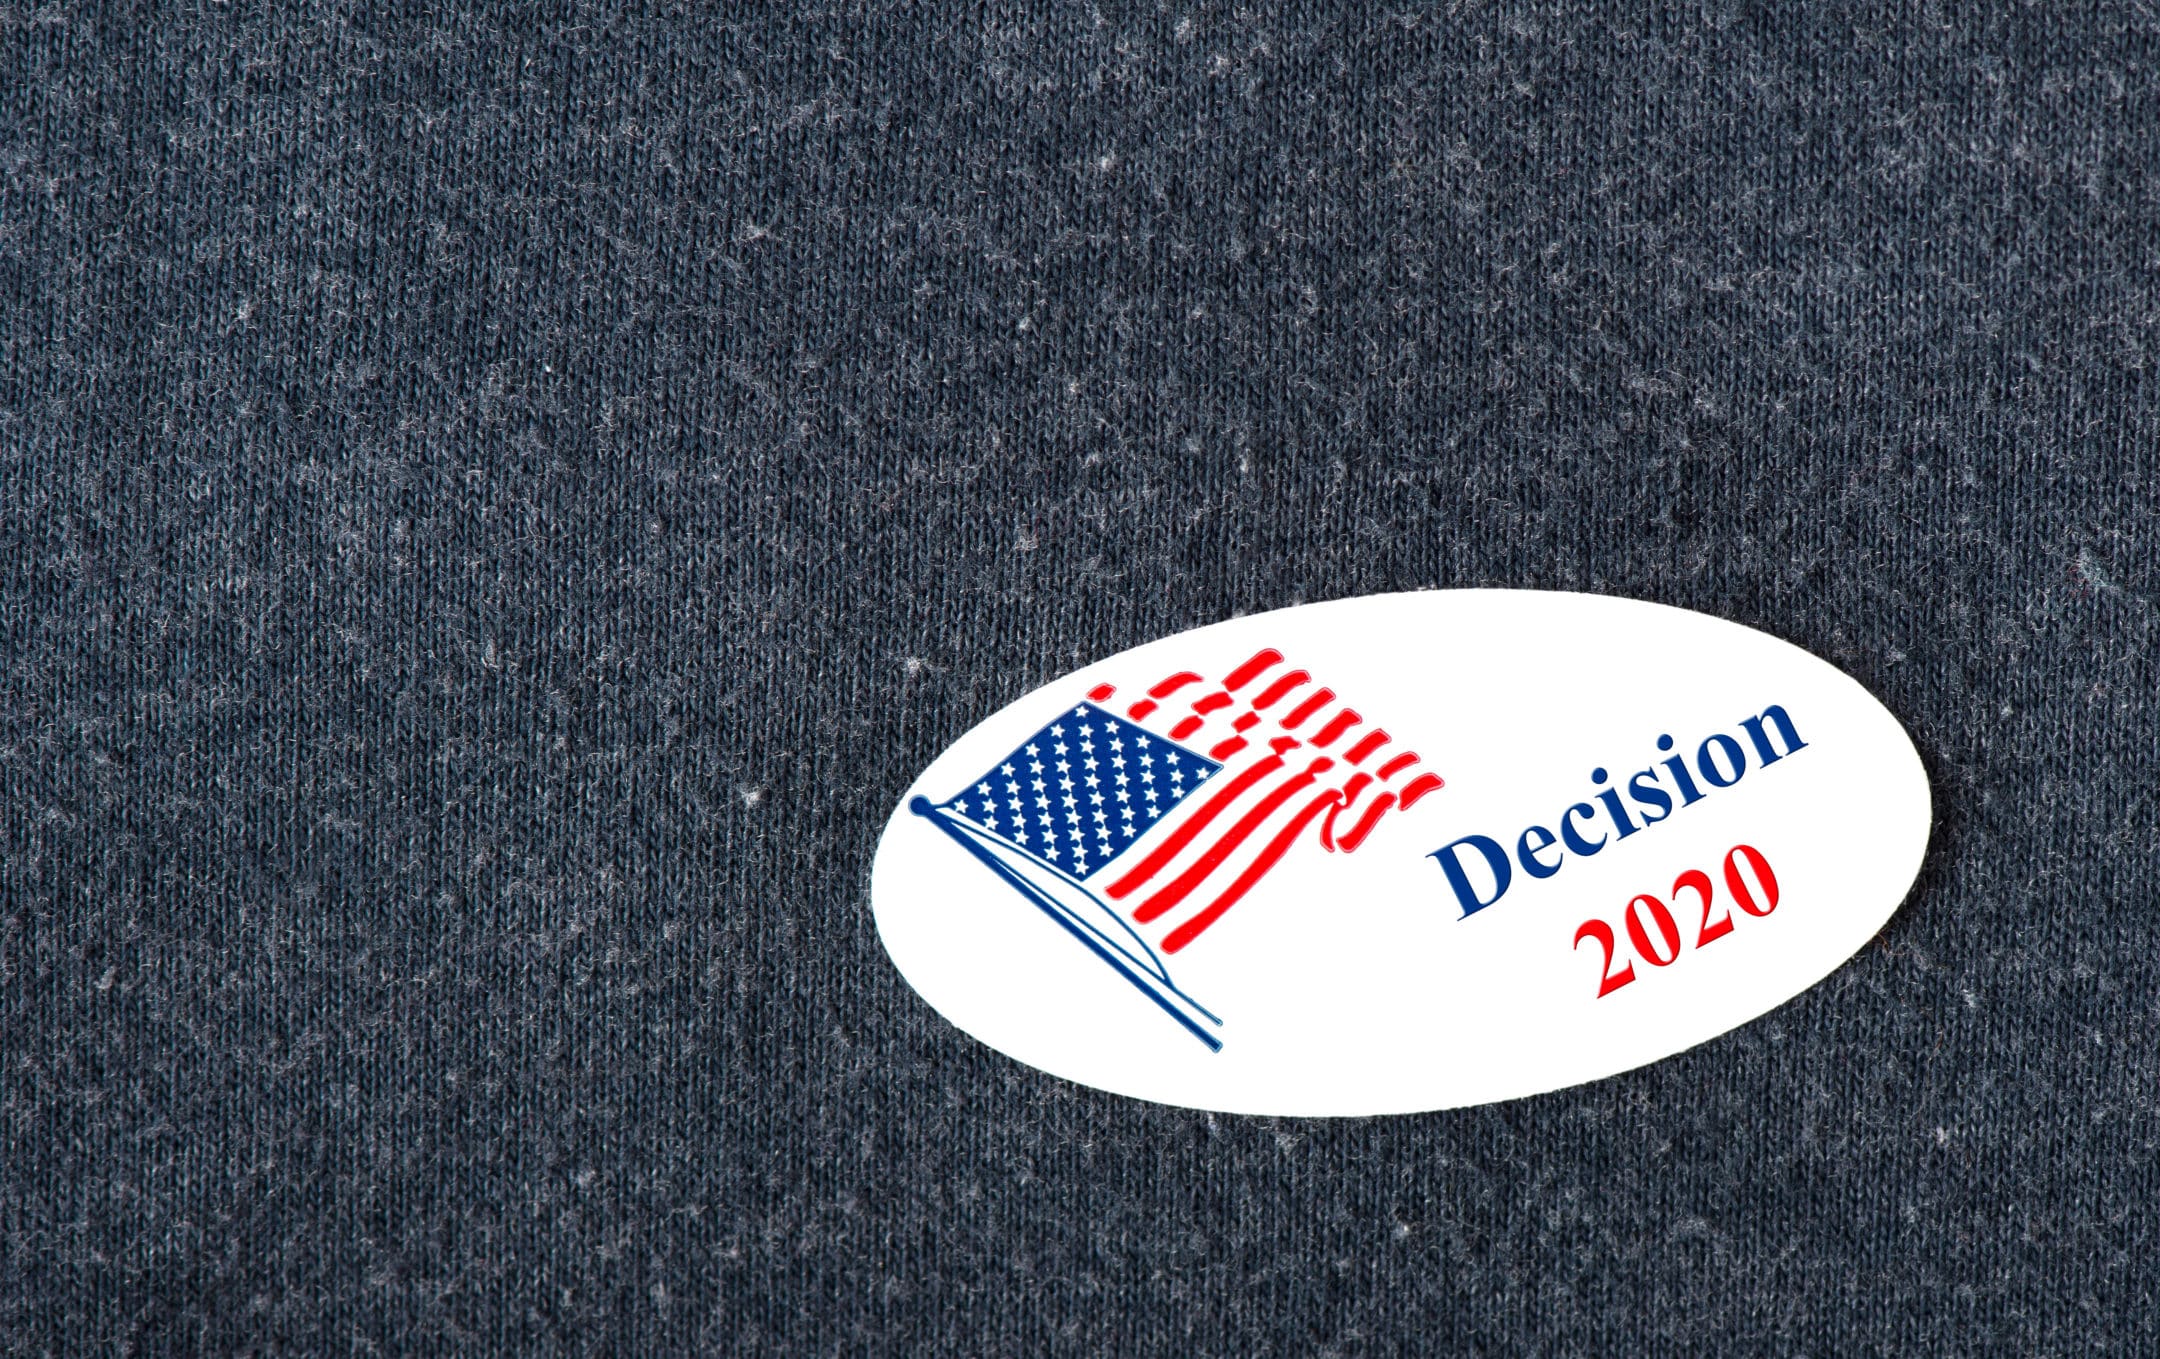 voting sticker with American flag